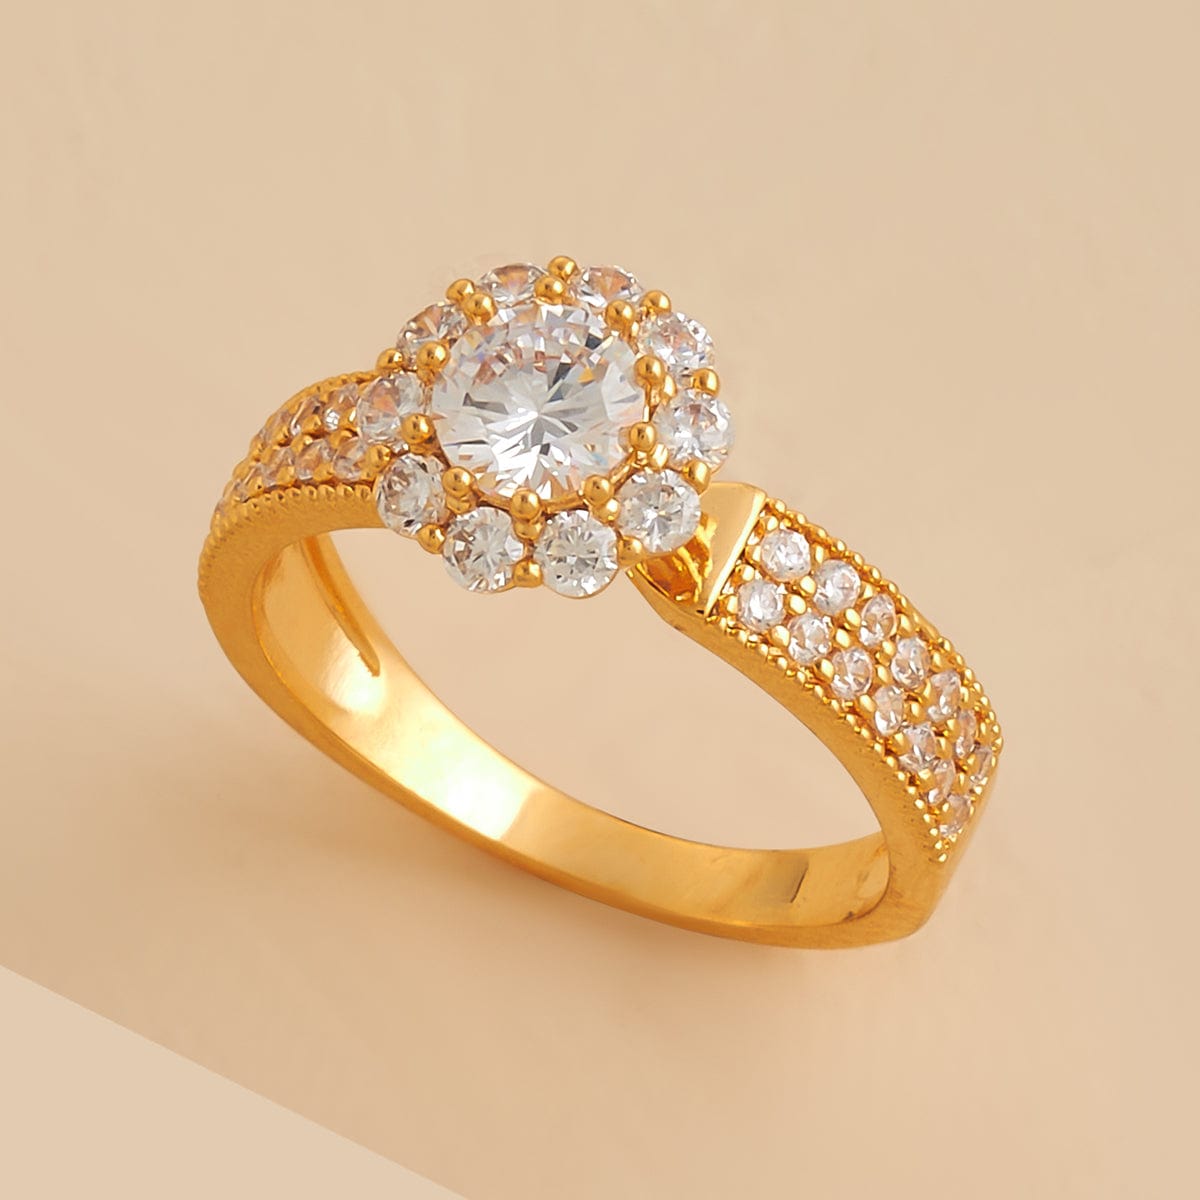 Buy Bridal Wear Gold Ring Design Gold Plated Fashion Ring Online